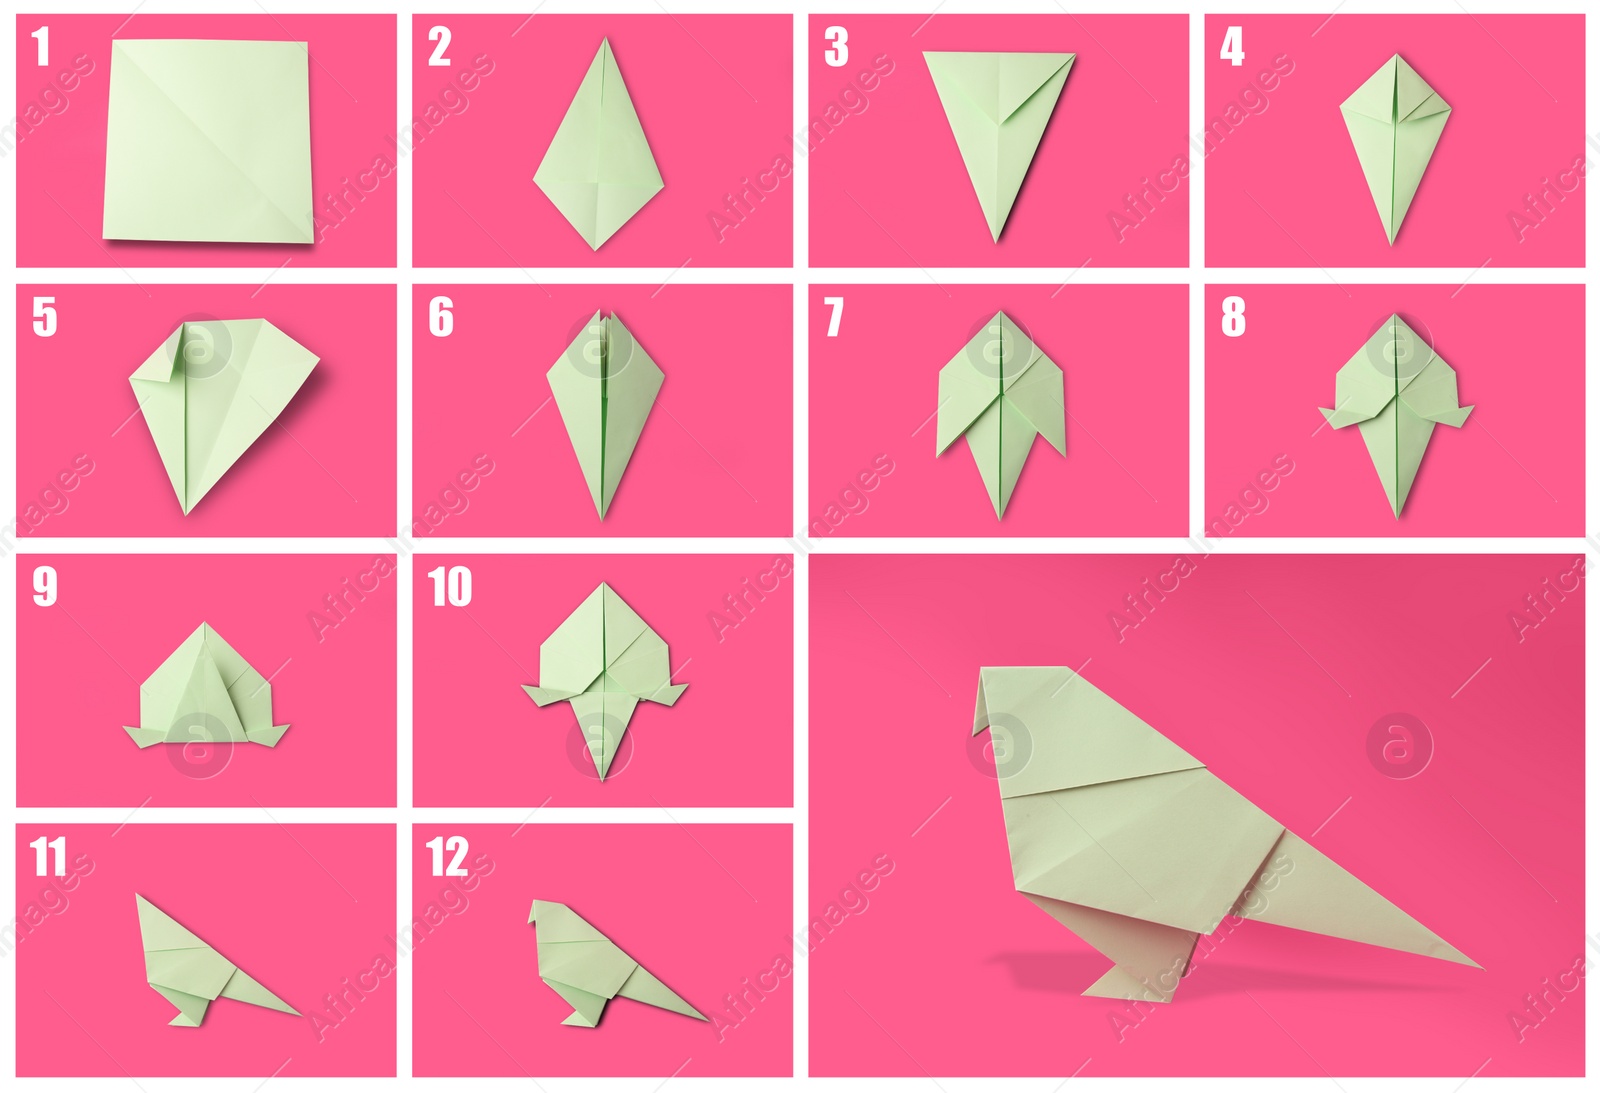 Image of Origami art. Making paper bird step by step, photo collage on pink background